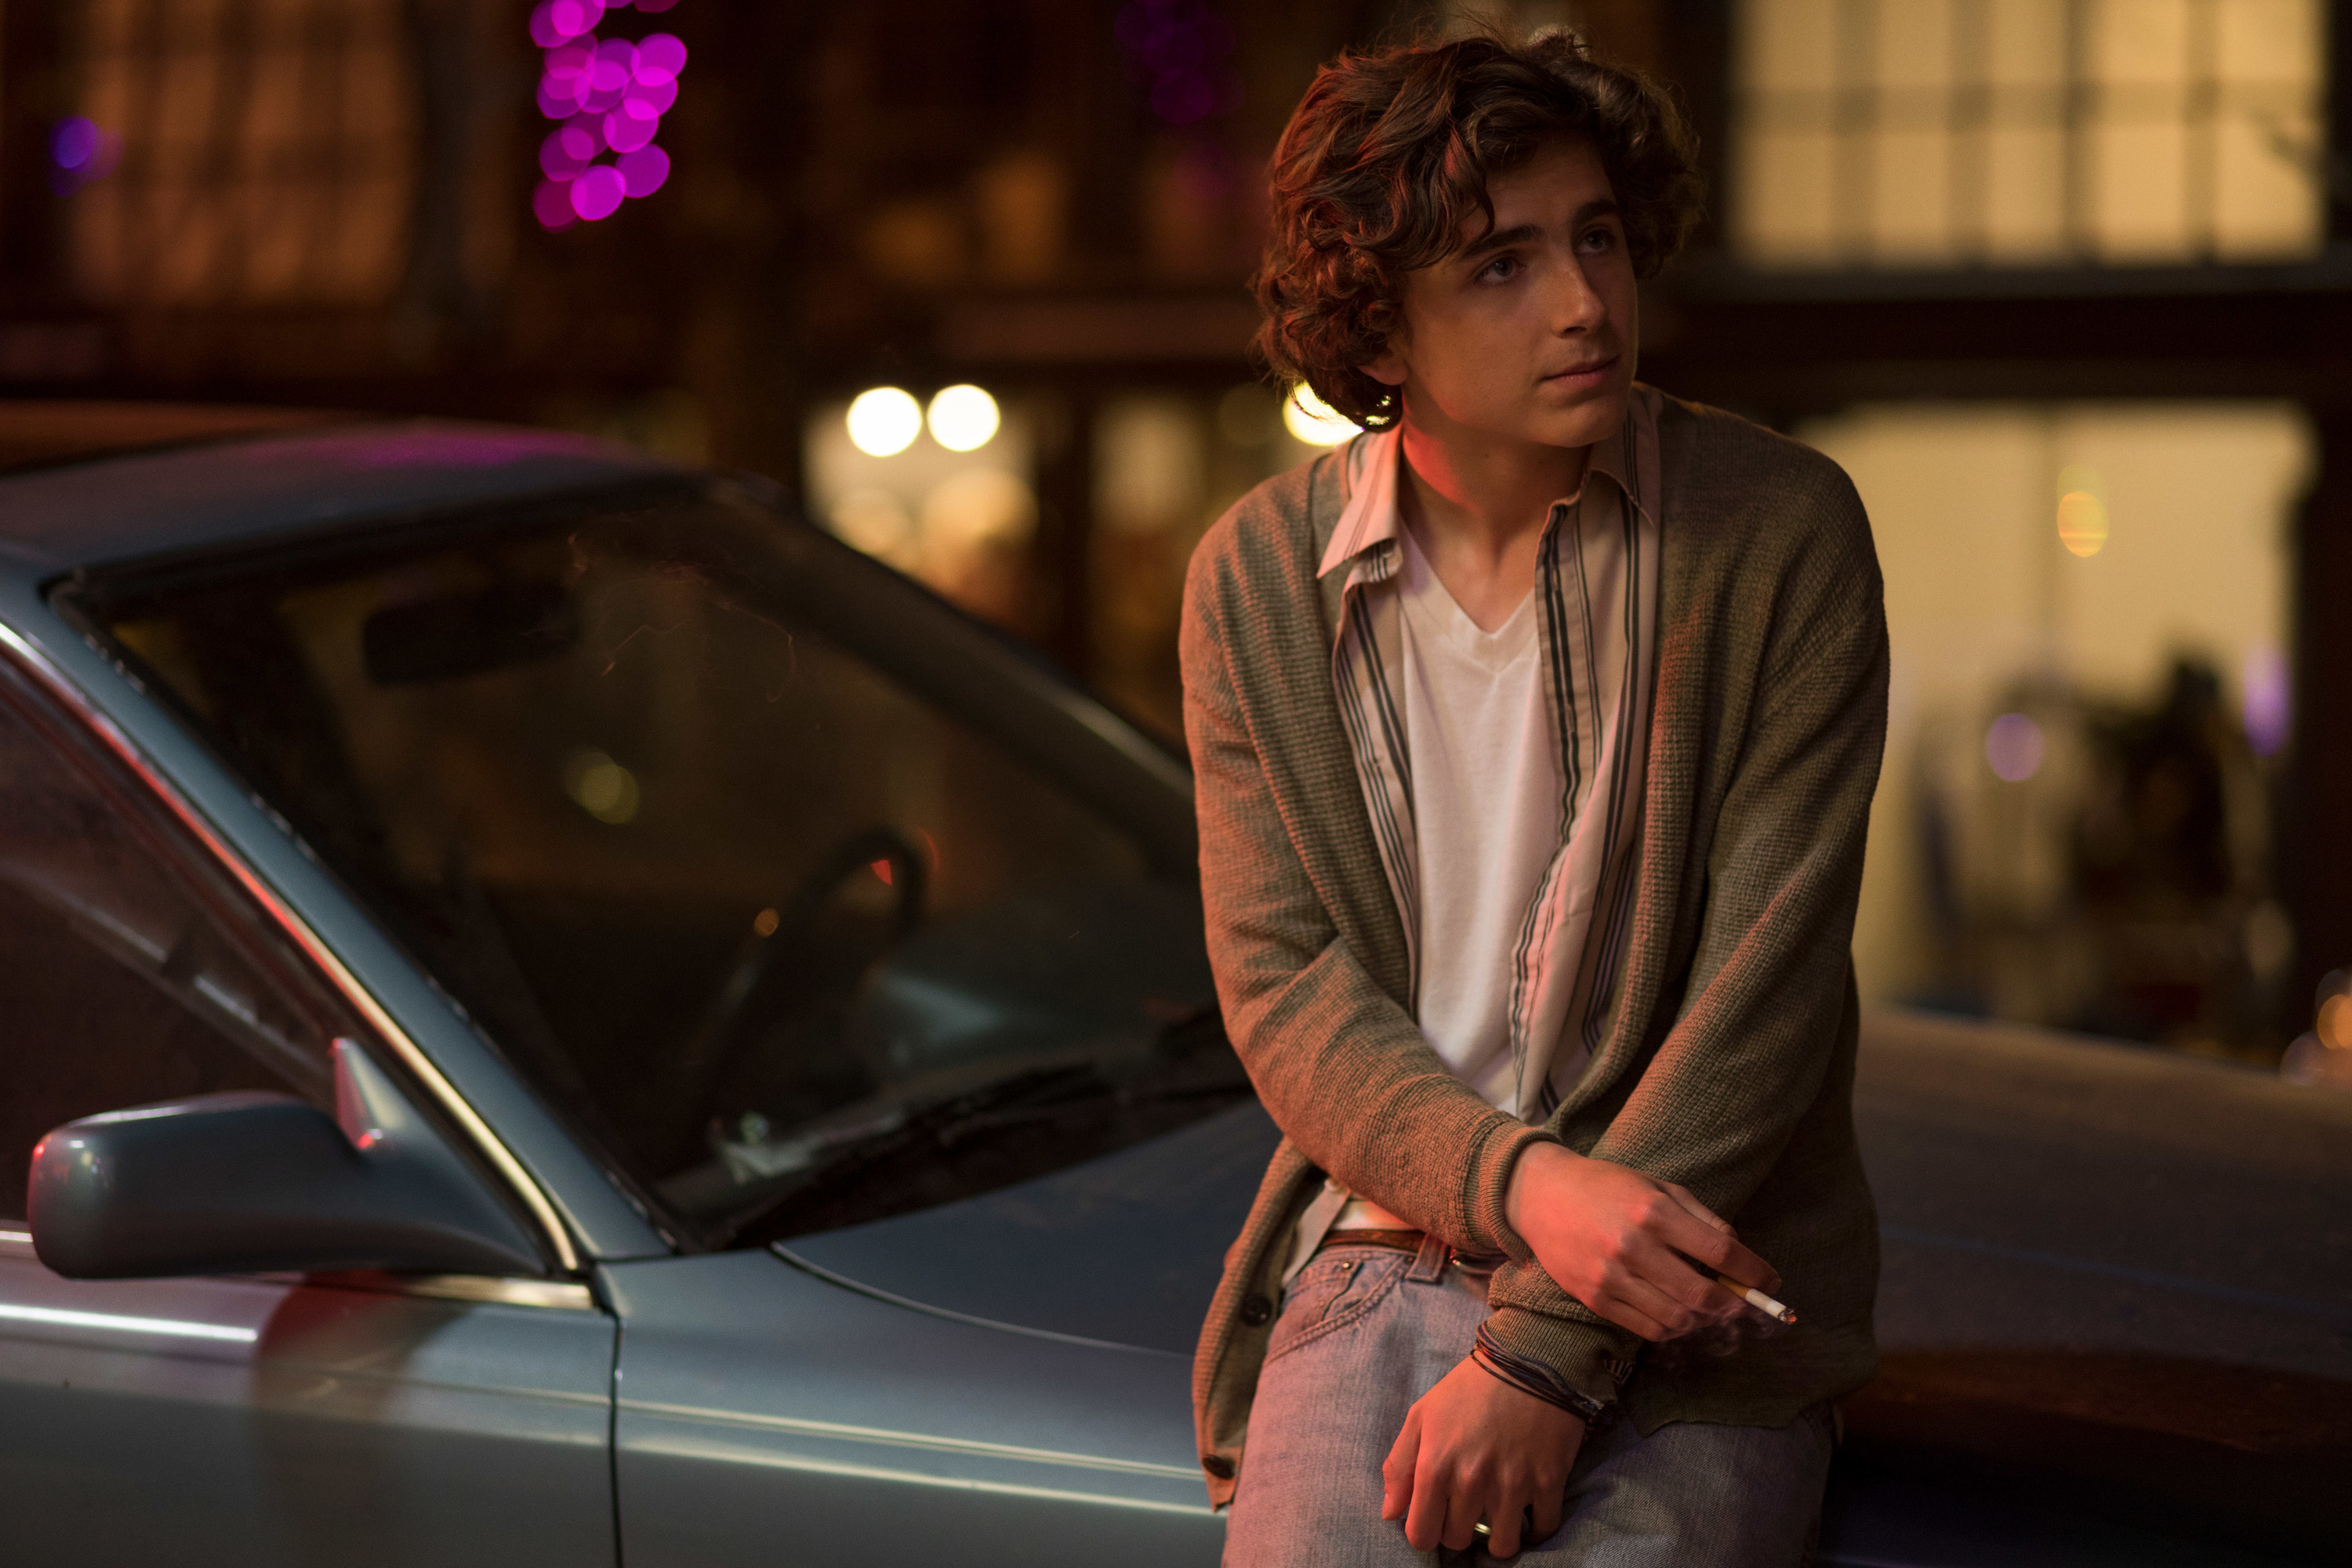 Timothee Chalamet smokes a cigarette leaning against a car